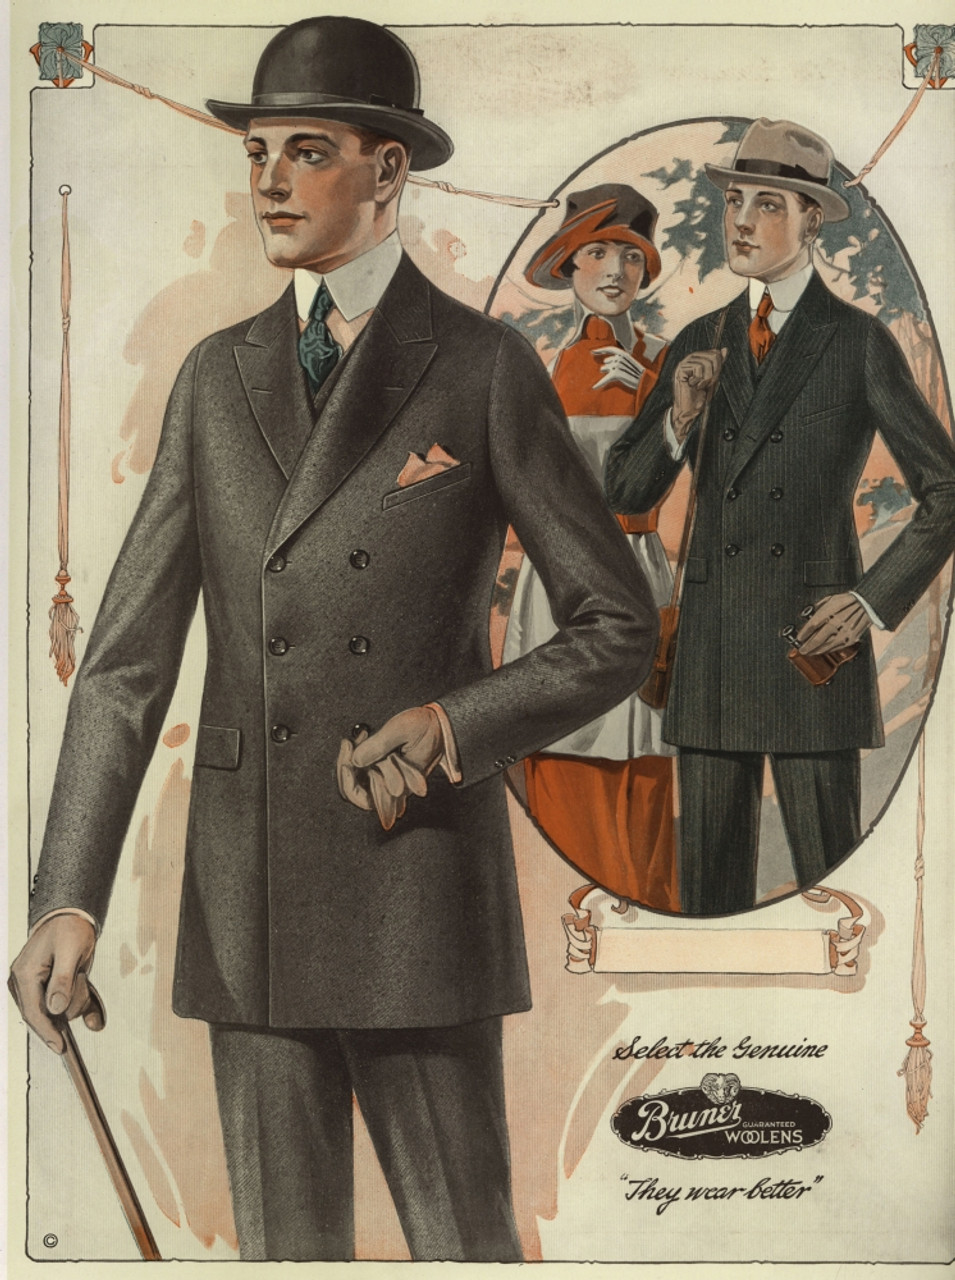 Men'S Conservative Double-Breasted Suits From The 1920S Poster Print By ...